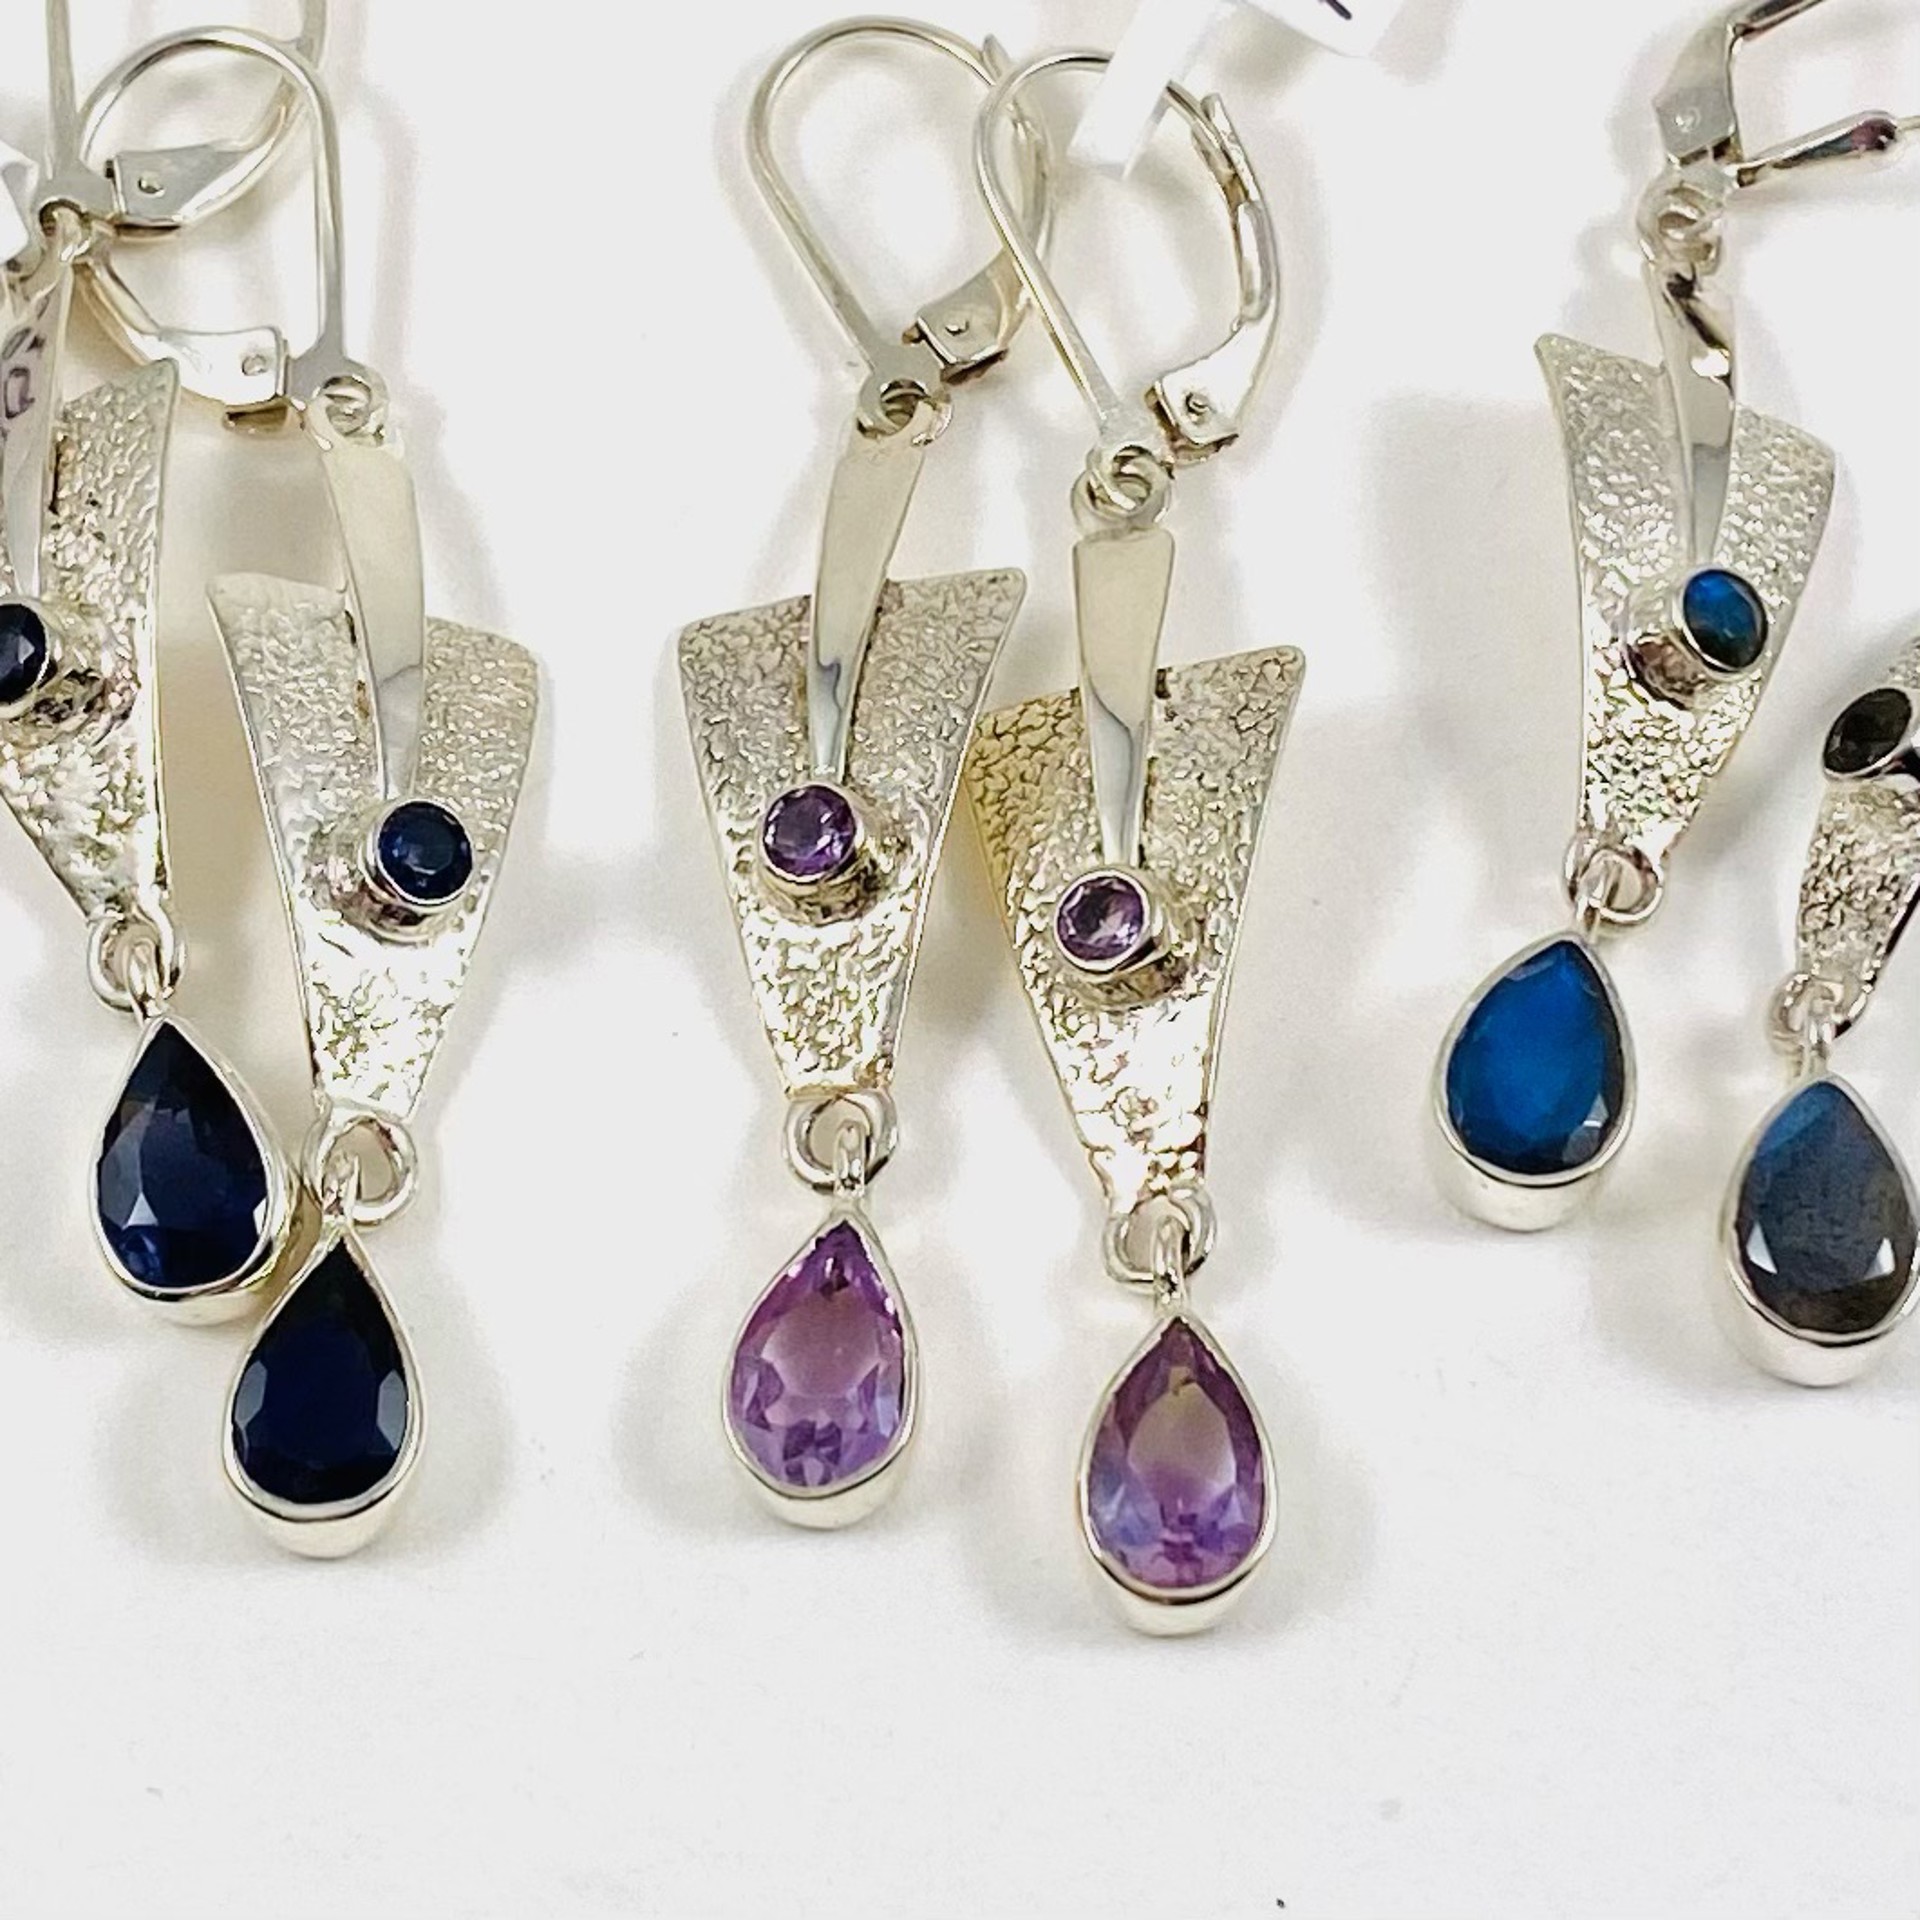 SE 3204 Earrings Iolite, Labradorite or Amythyst LIMITED by Monica Mehta